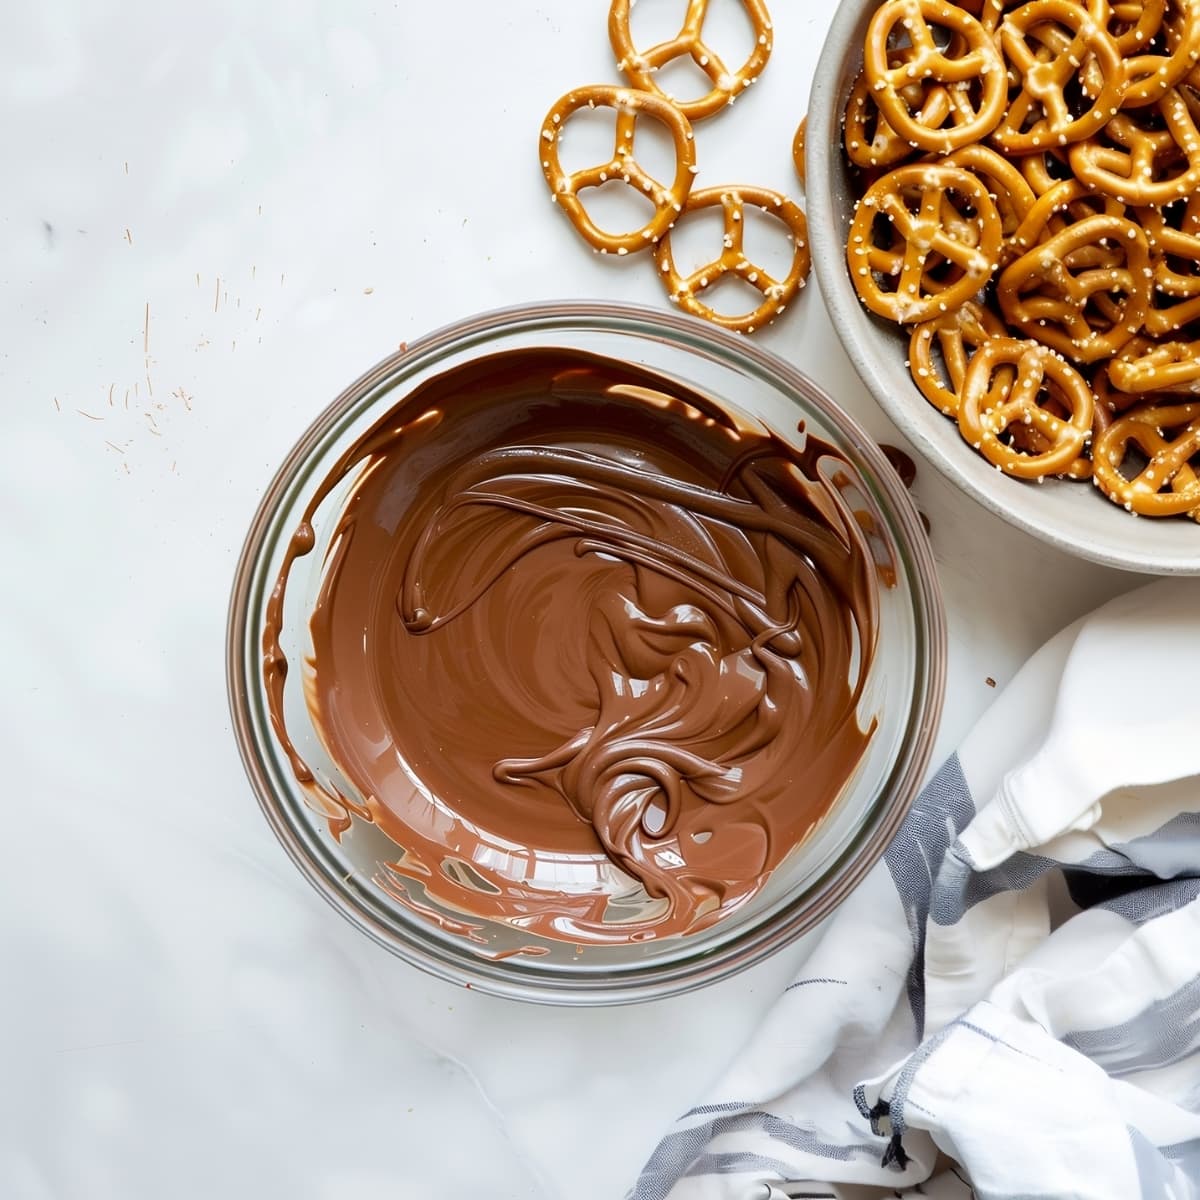 A glass bowl of melted chocolate chips with pretzels on the side